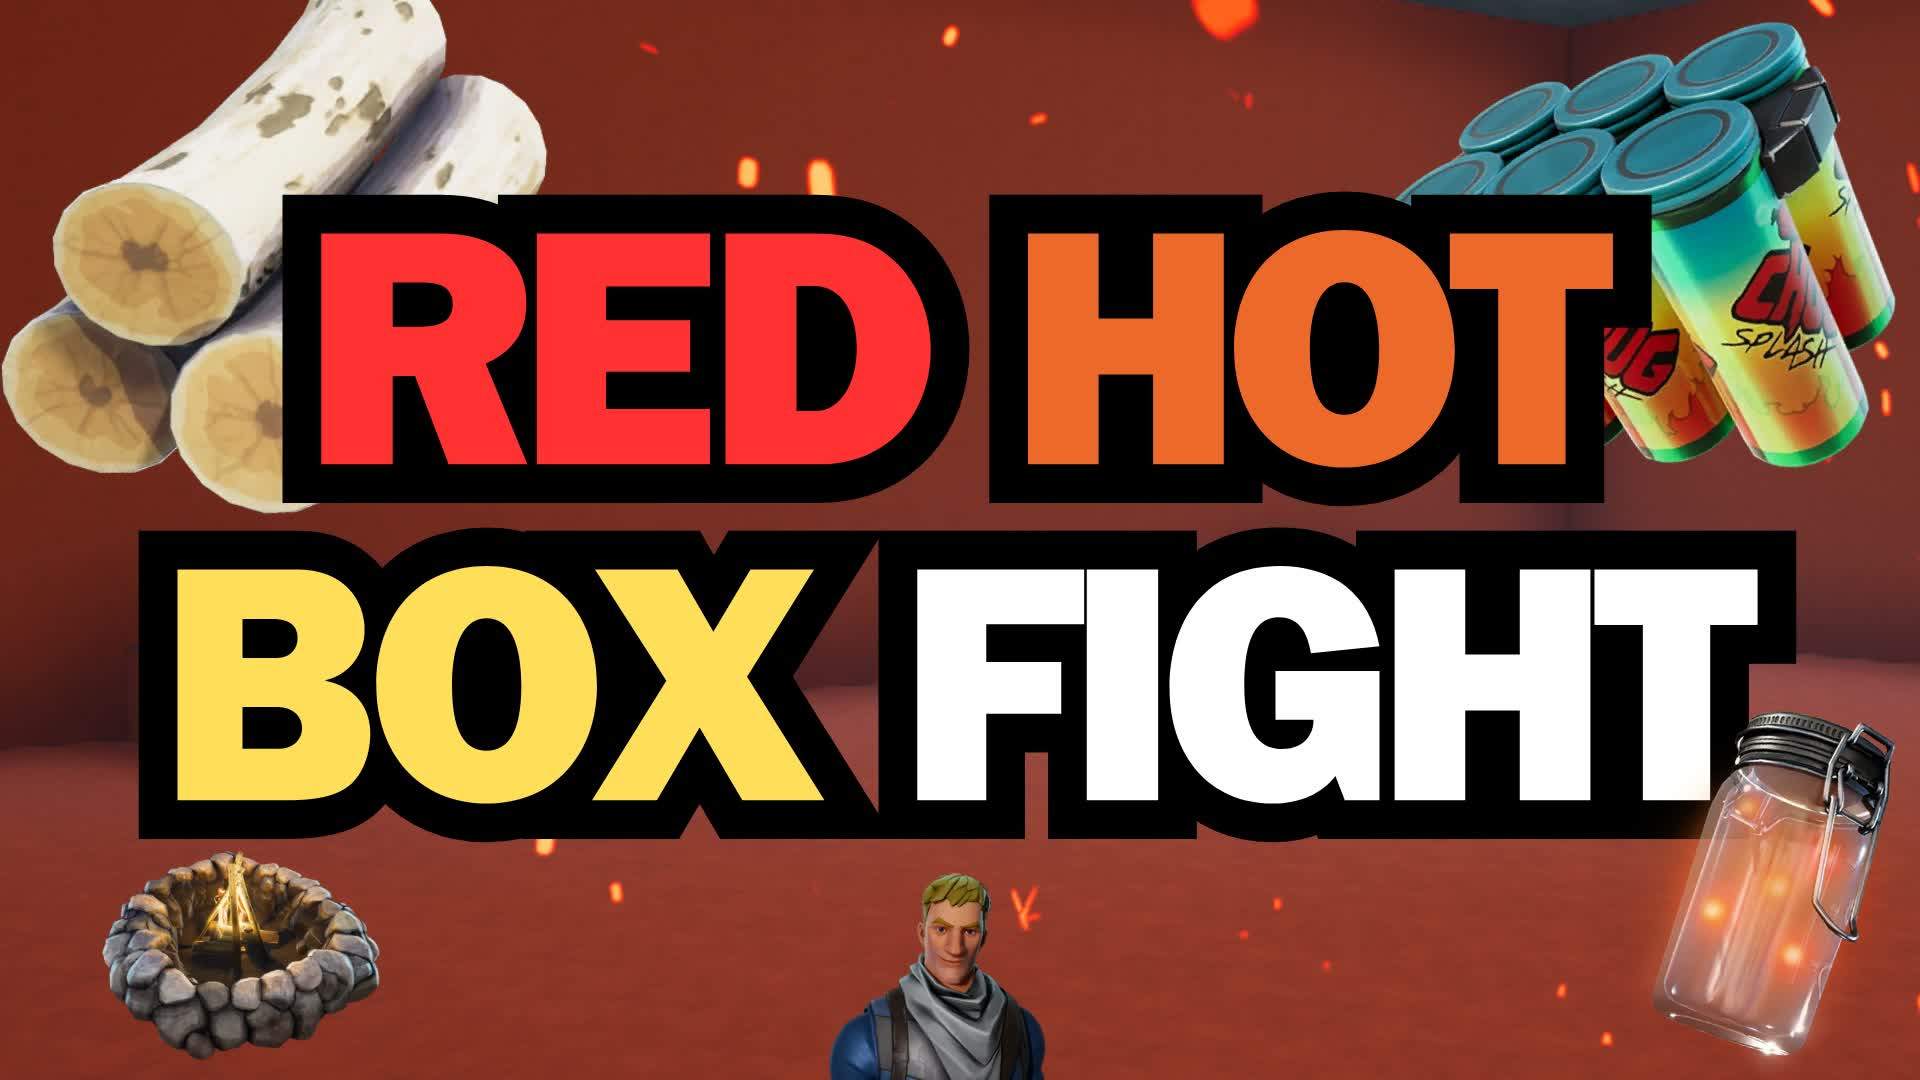 Red Hot Box Fight!